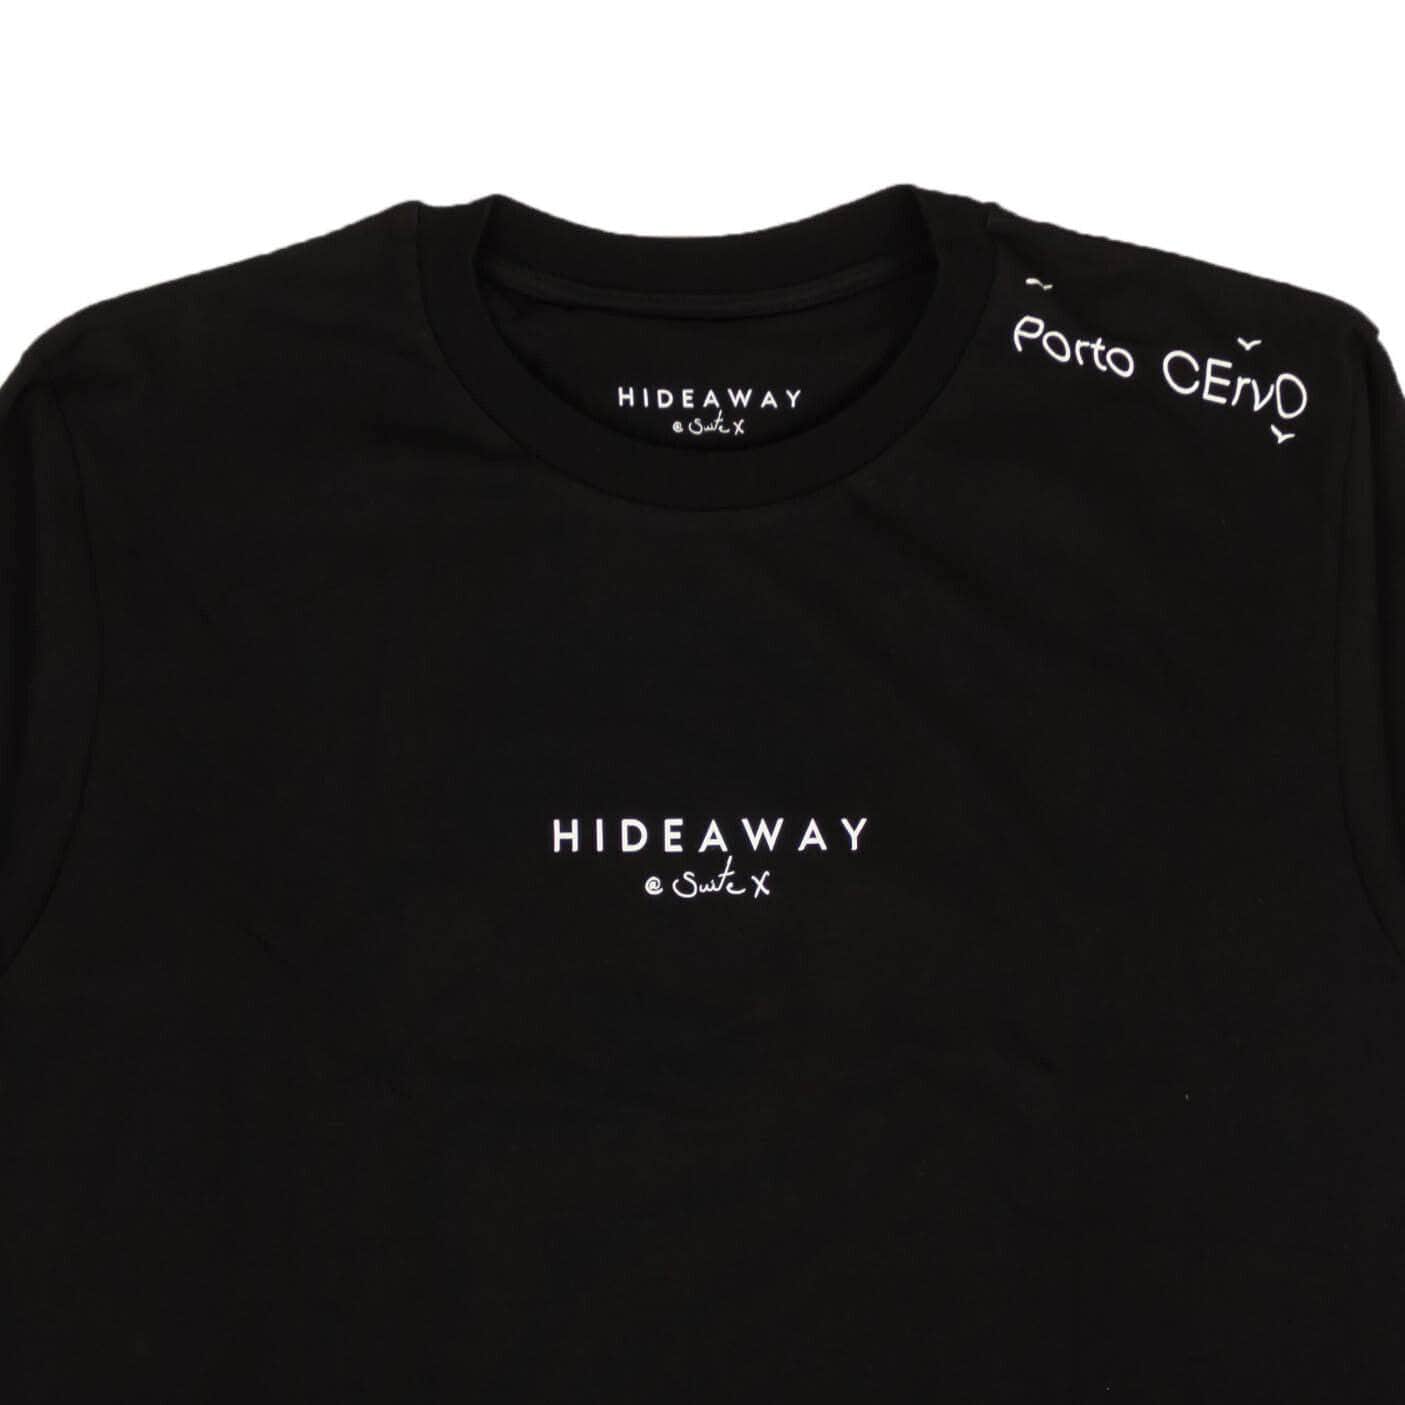 HIDEAWAY channelenable-all, chicmi, couponcollection, gender-mens, hideaway, main-clothing, mens-shoes, size-os, under-250 OS Black Logo Long Sleeve T-Shirt 87AB-HW-1005 87AB-HW-1005